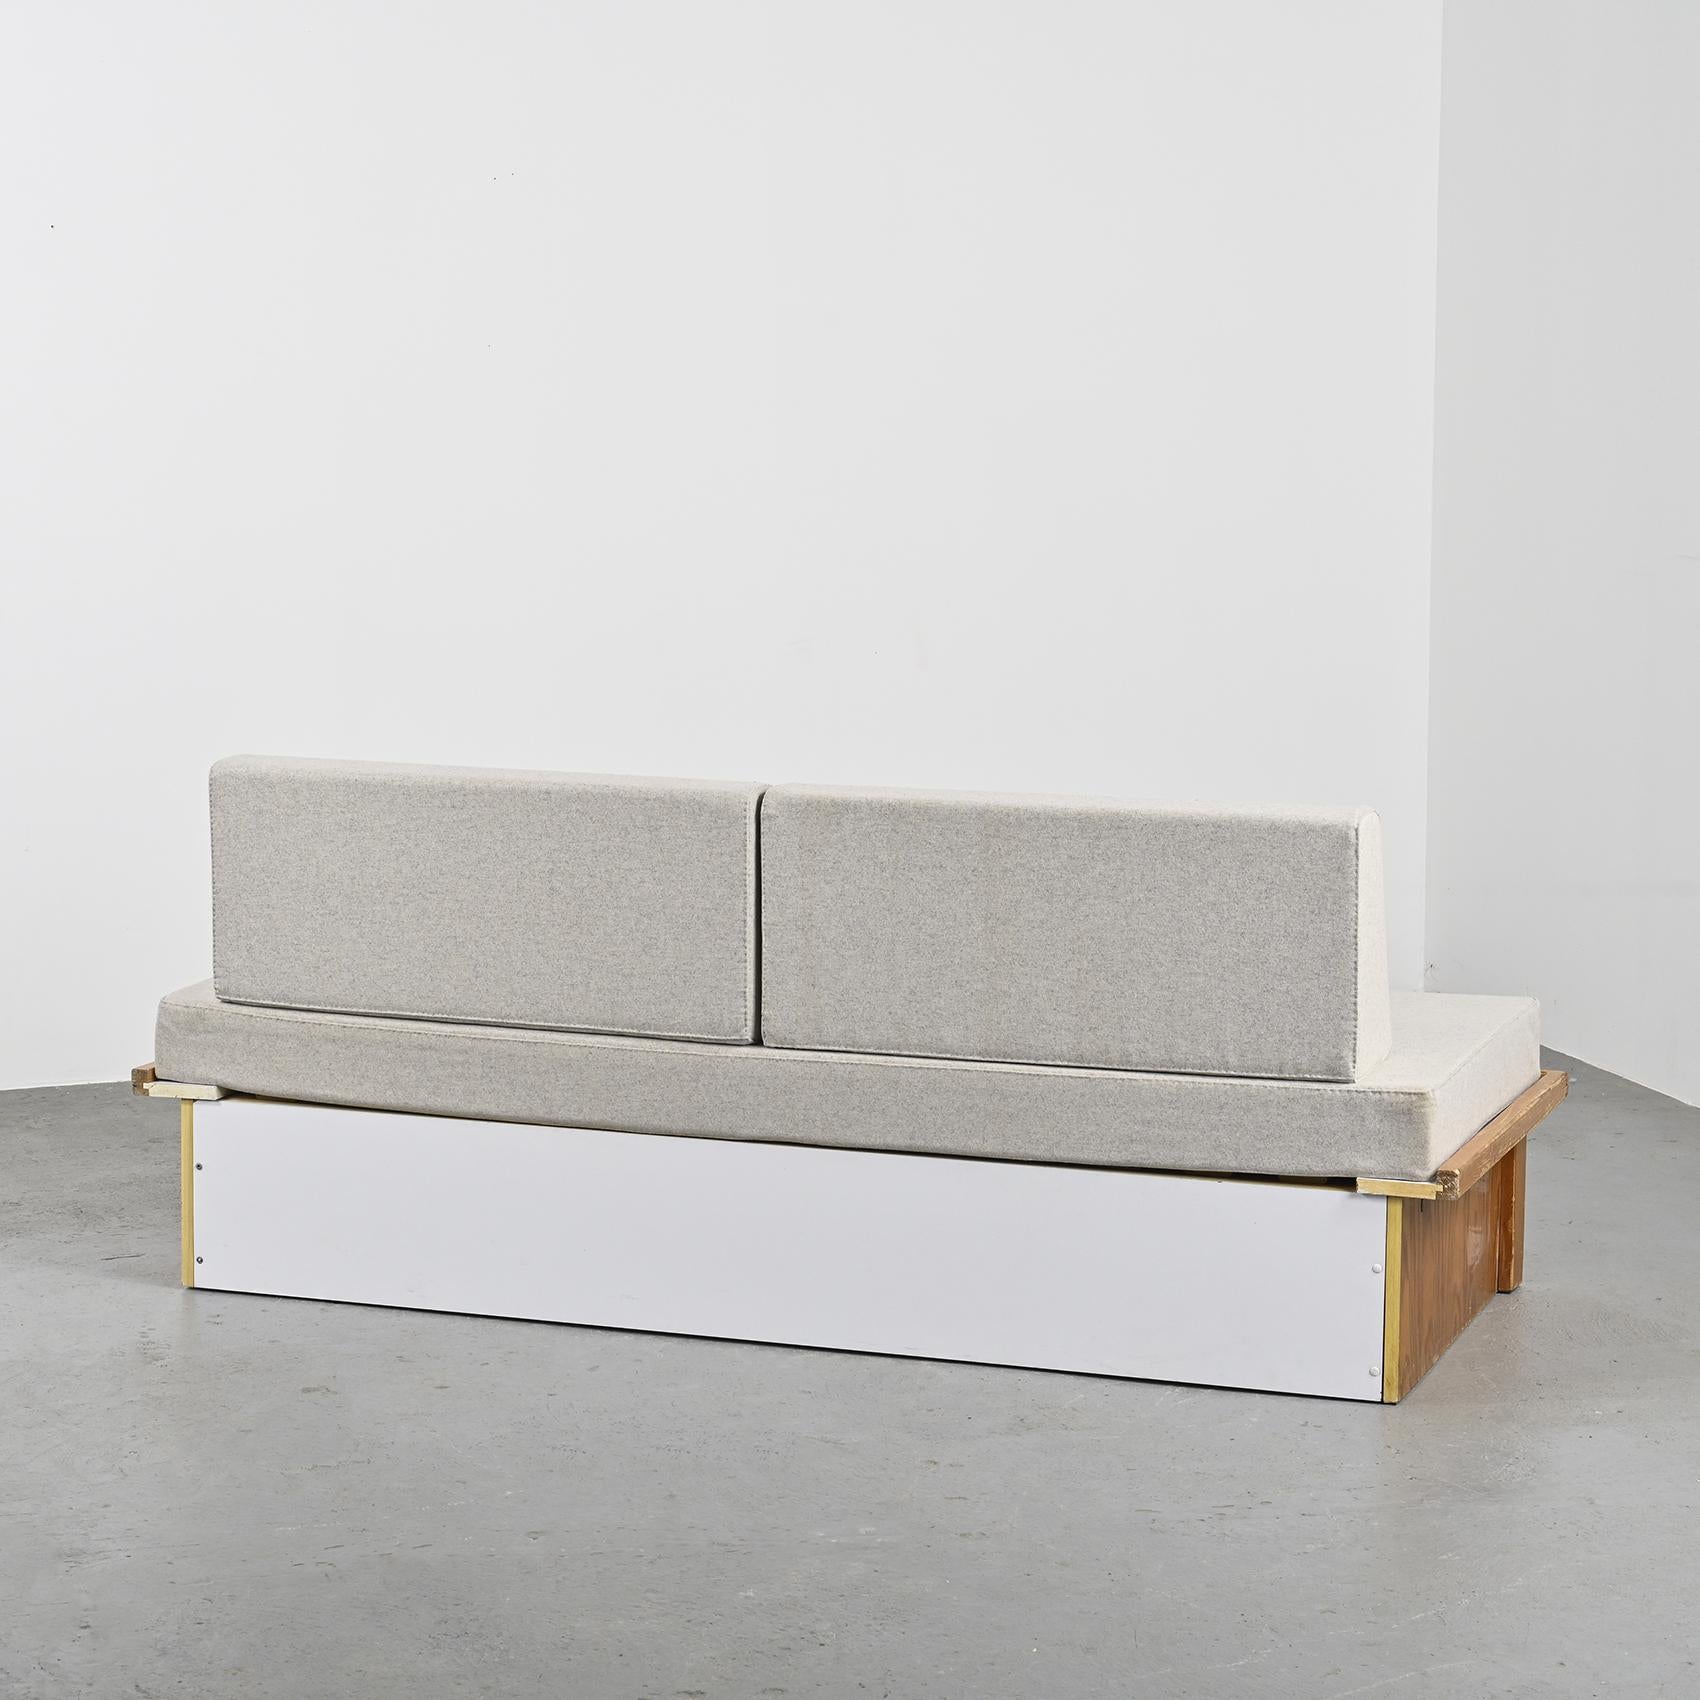 Pine Les Arcs Bench by Charlotte Perriand, circa 1973